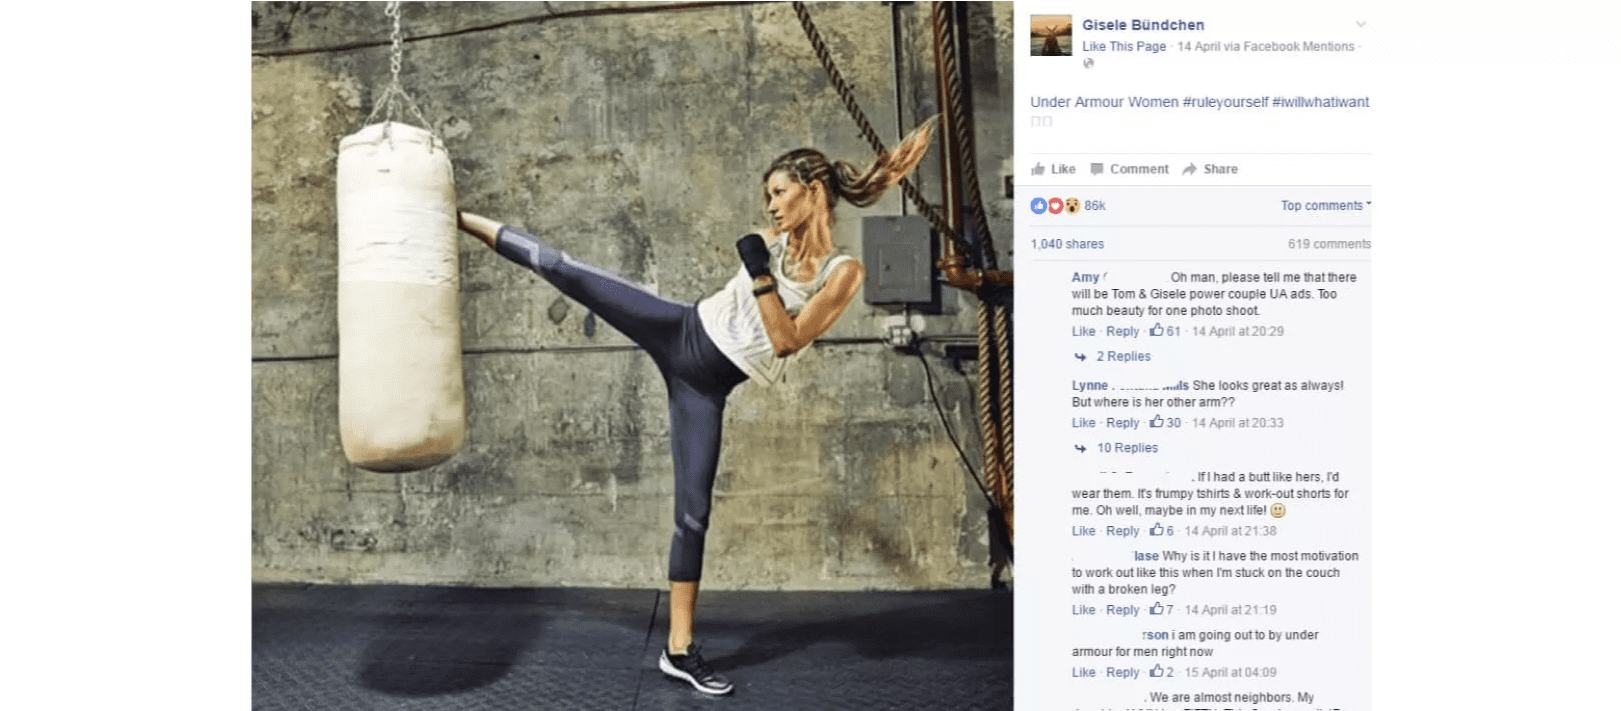 Under Armour's viral Facebook post featuring Gisele Bündchen in a kickboxing workout, promoting the '#IWILLWHATIWANT' campaign for women's empowerment and athletic wear.